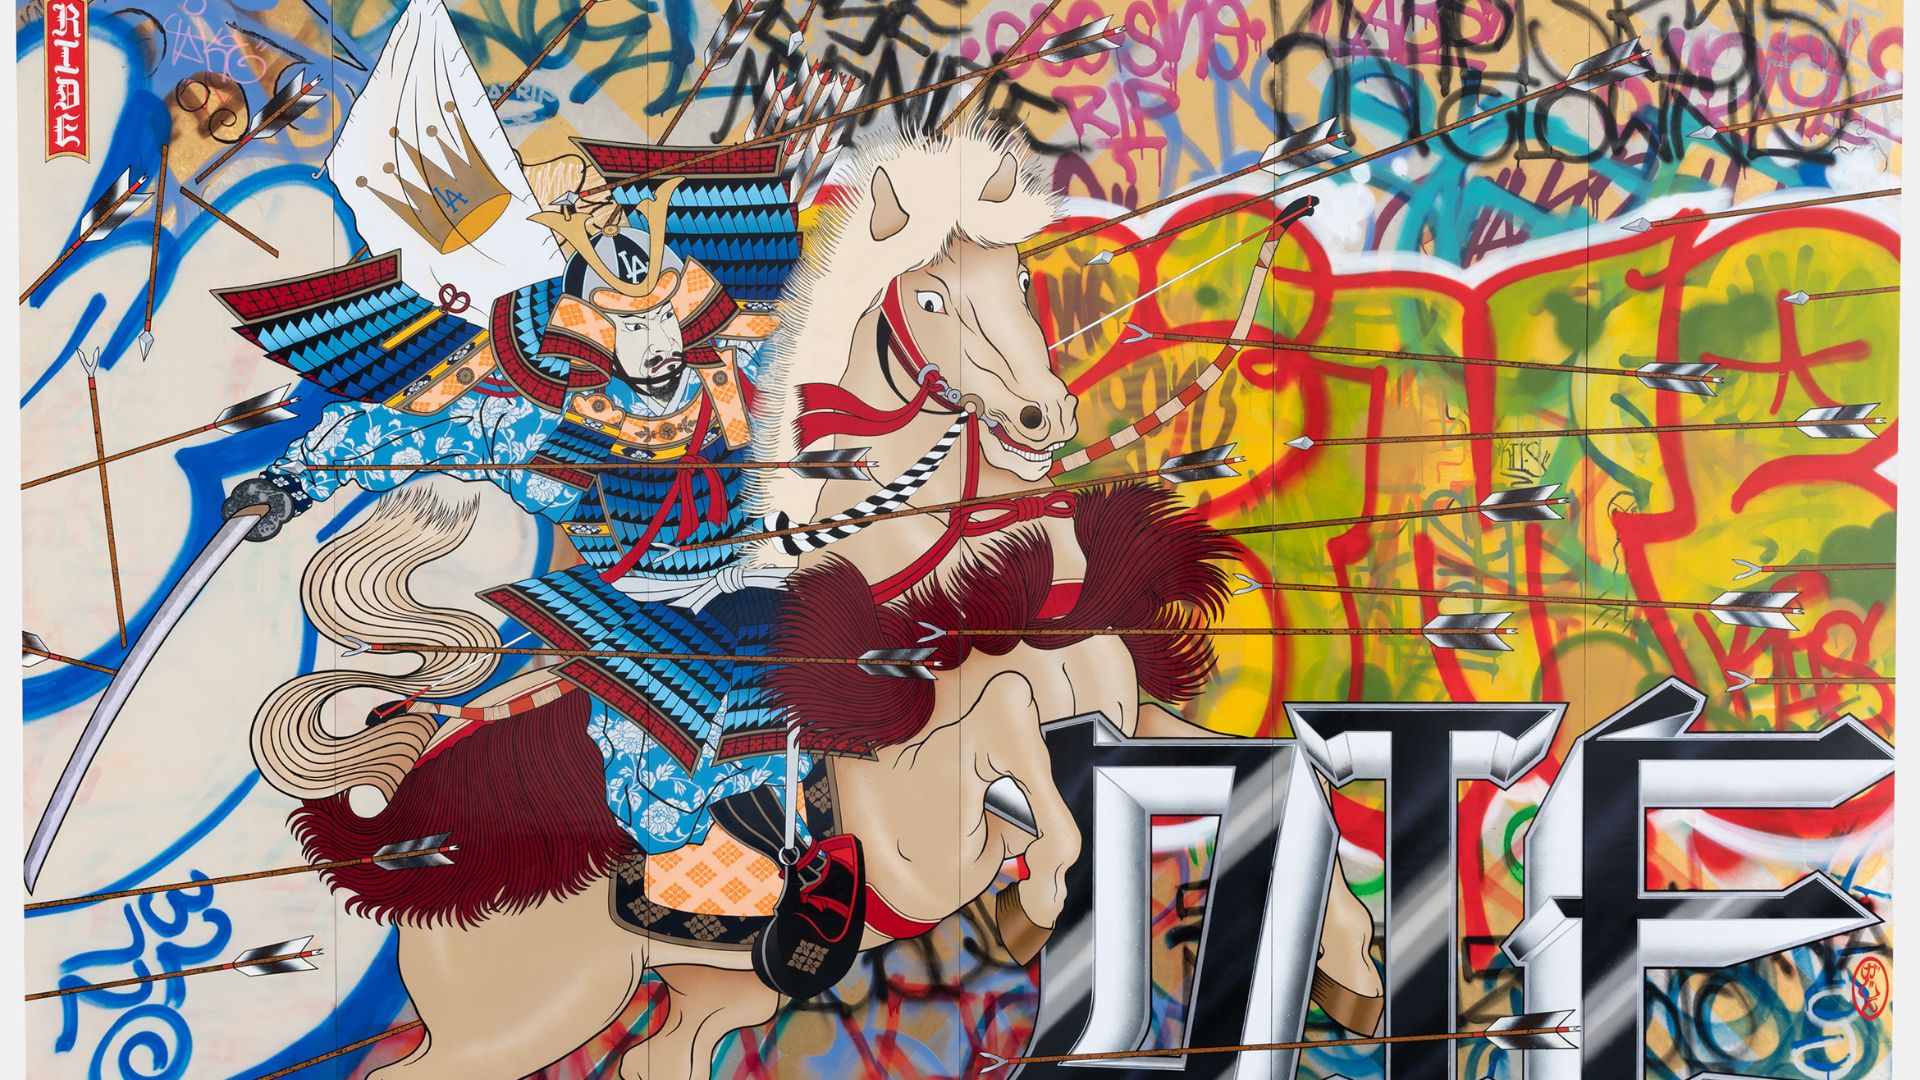 This painting combines Japanese imagery and graffiti.